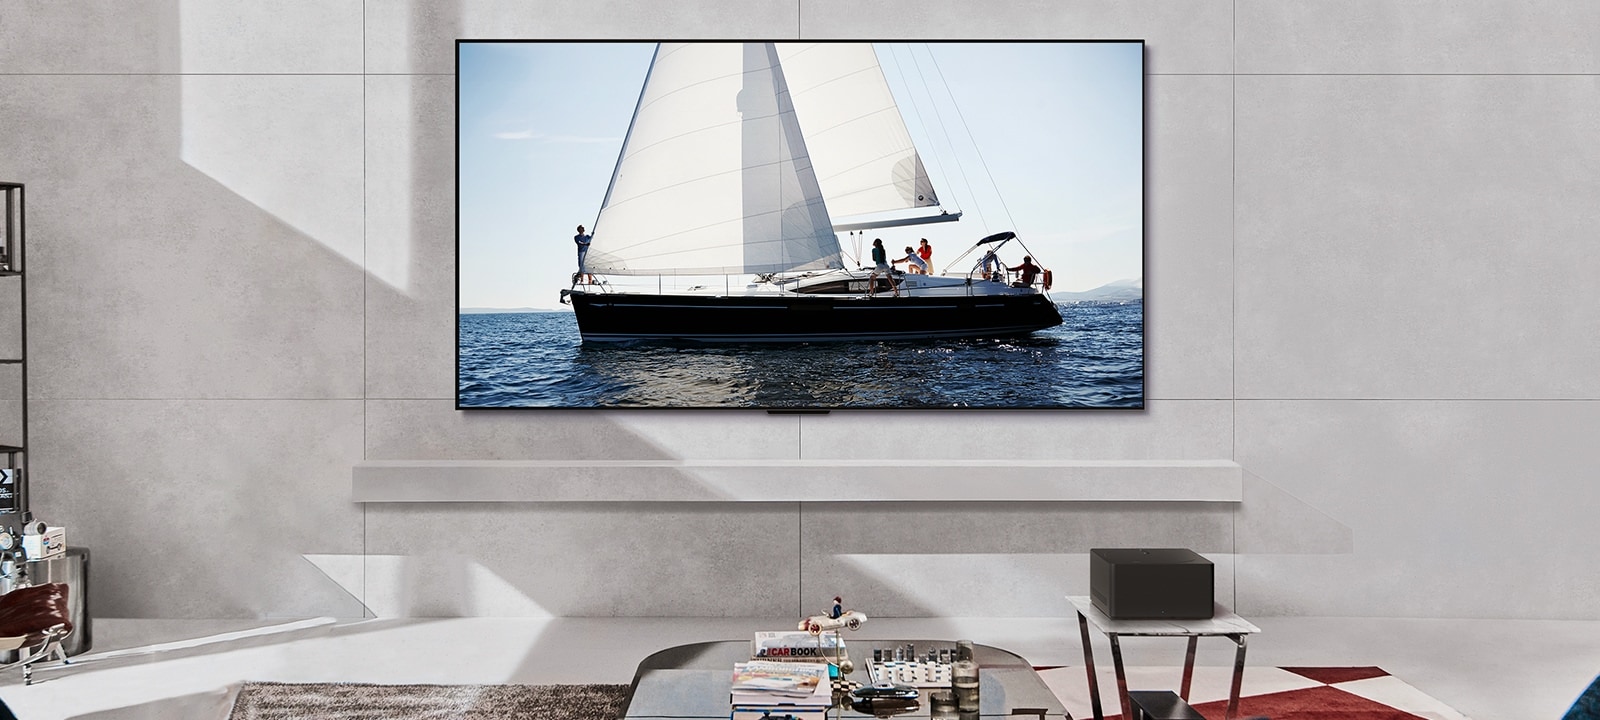 LG OLED evo M4 and LG Soundbar in a modern living space in daytime. The screen image of a sailboat in the ocean is displayed with the ideal brightness levels.